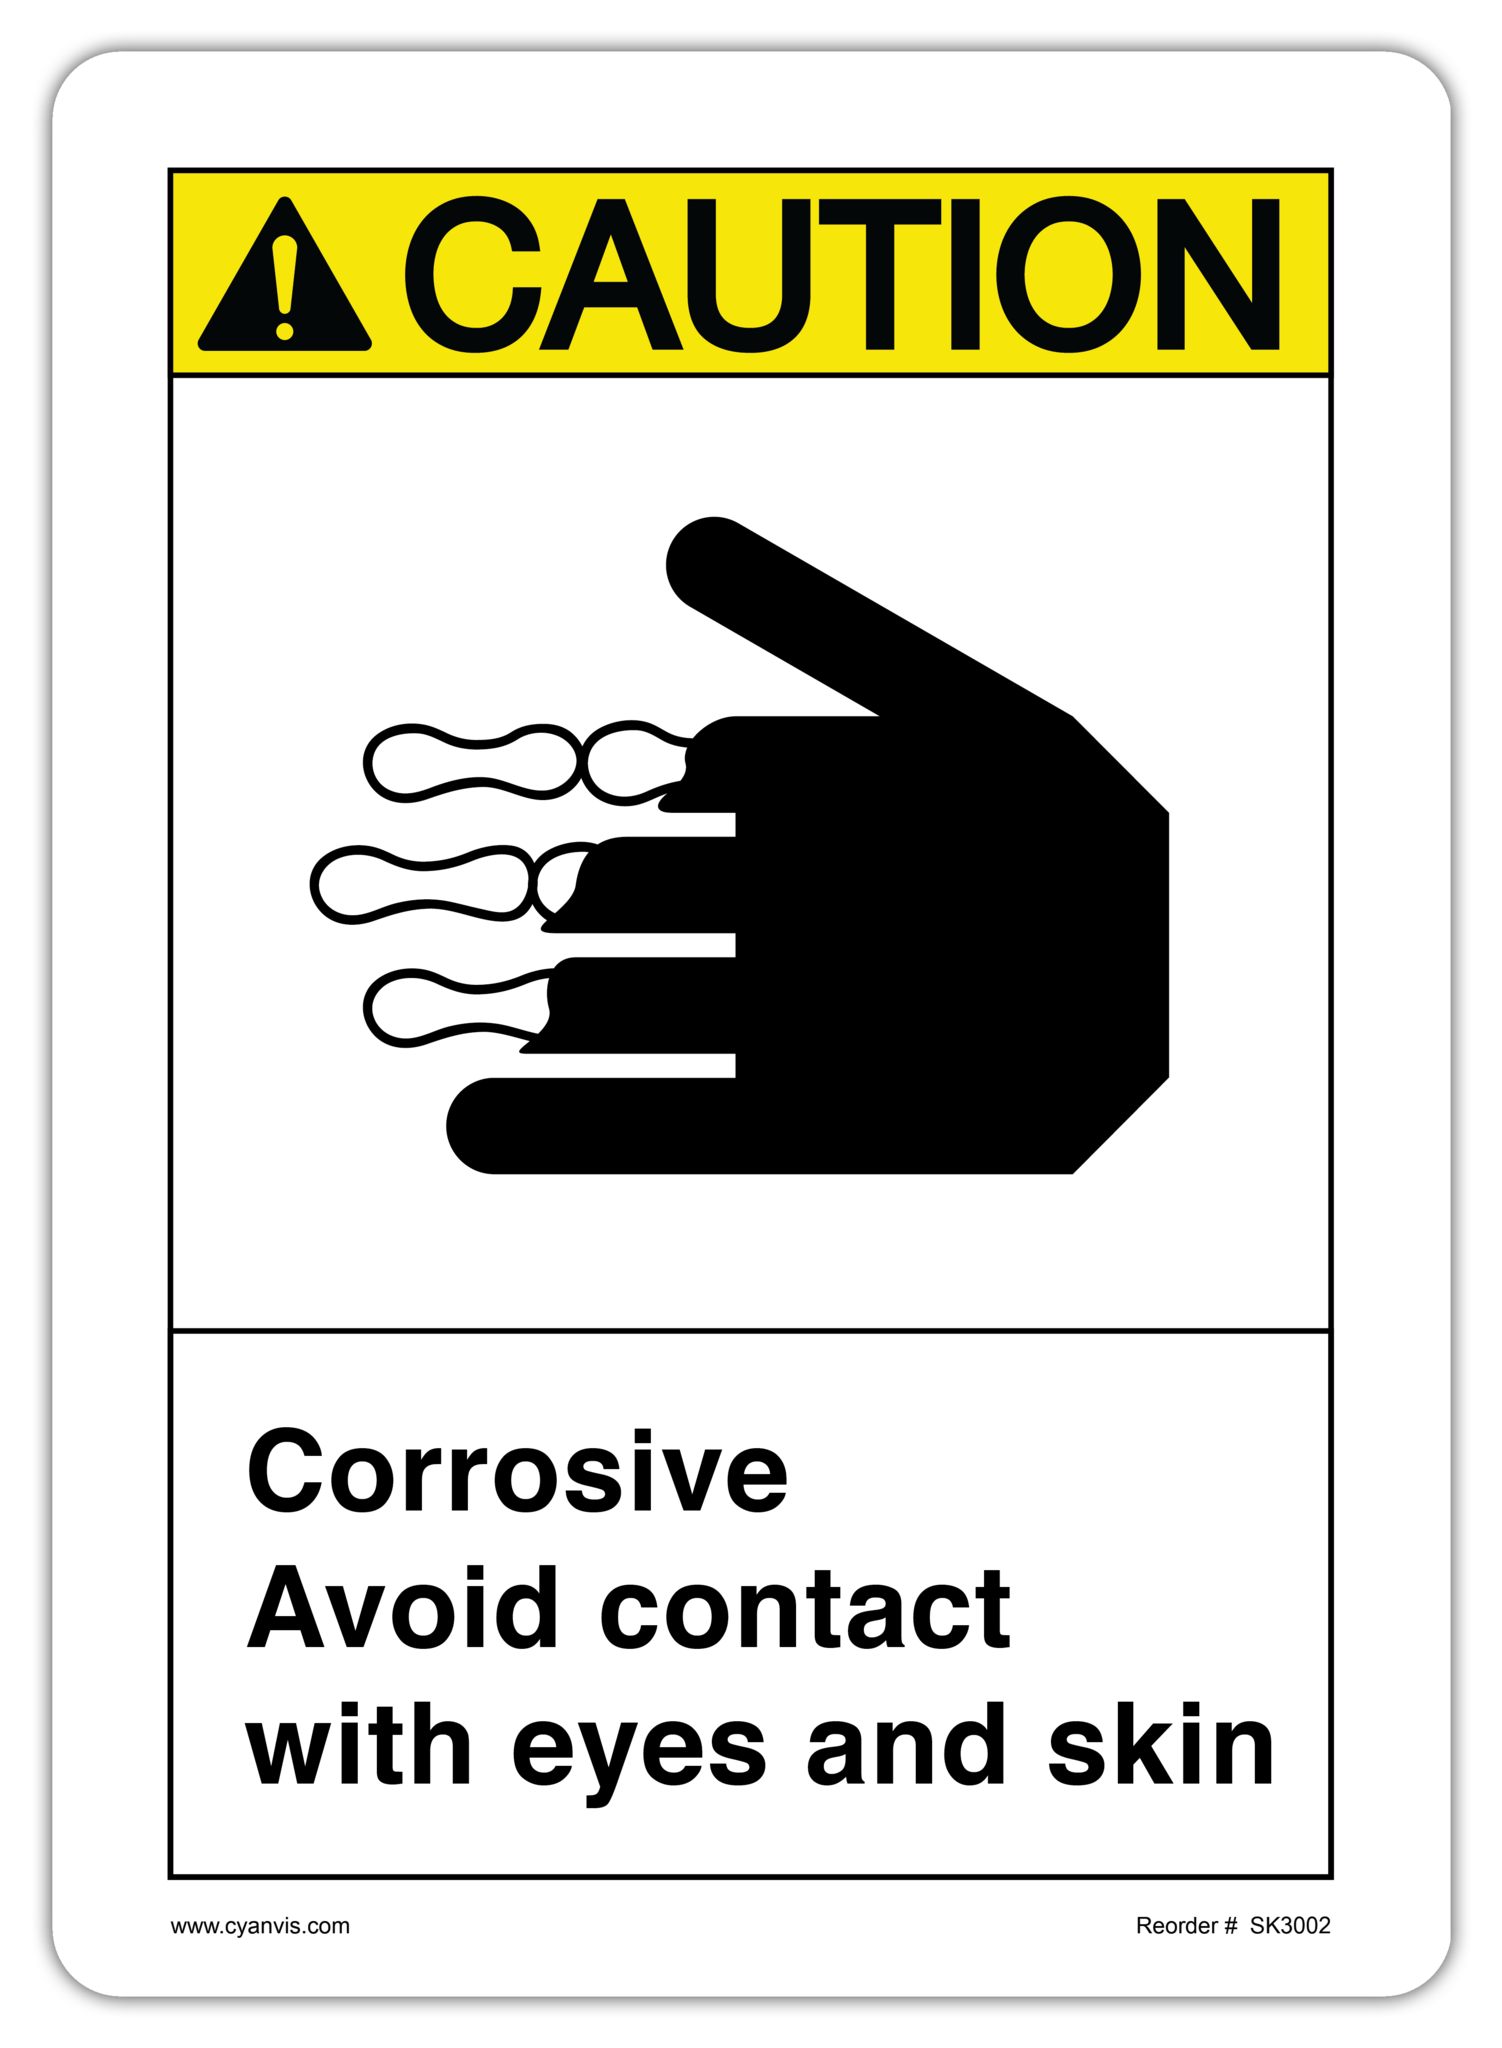 Safety Sign: ASNI - Caution - CORROSIVE AVOID CONTACT WITH EYES AND SKIN - CYANvisuals